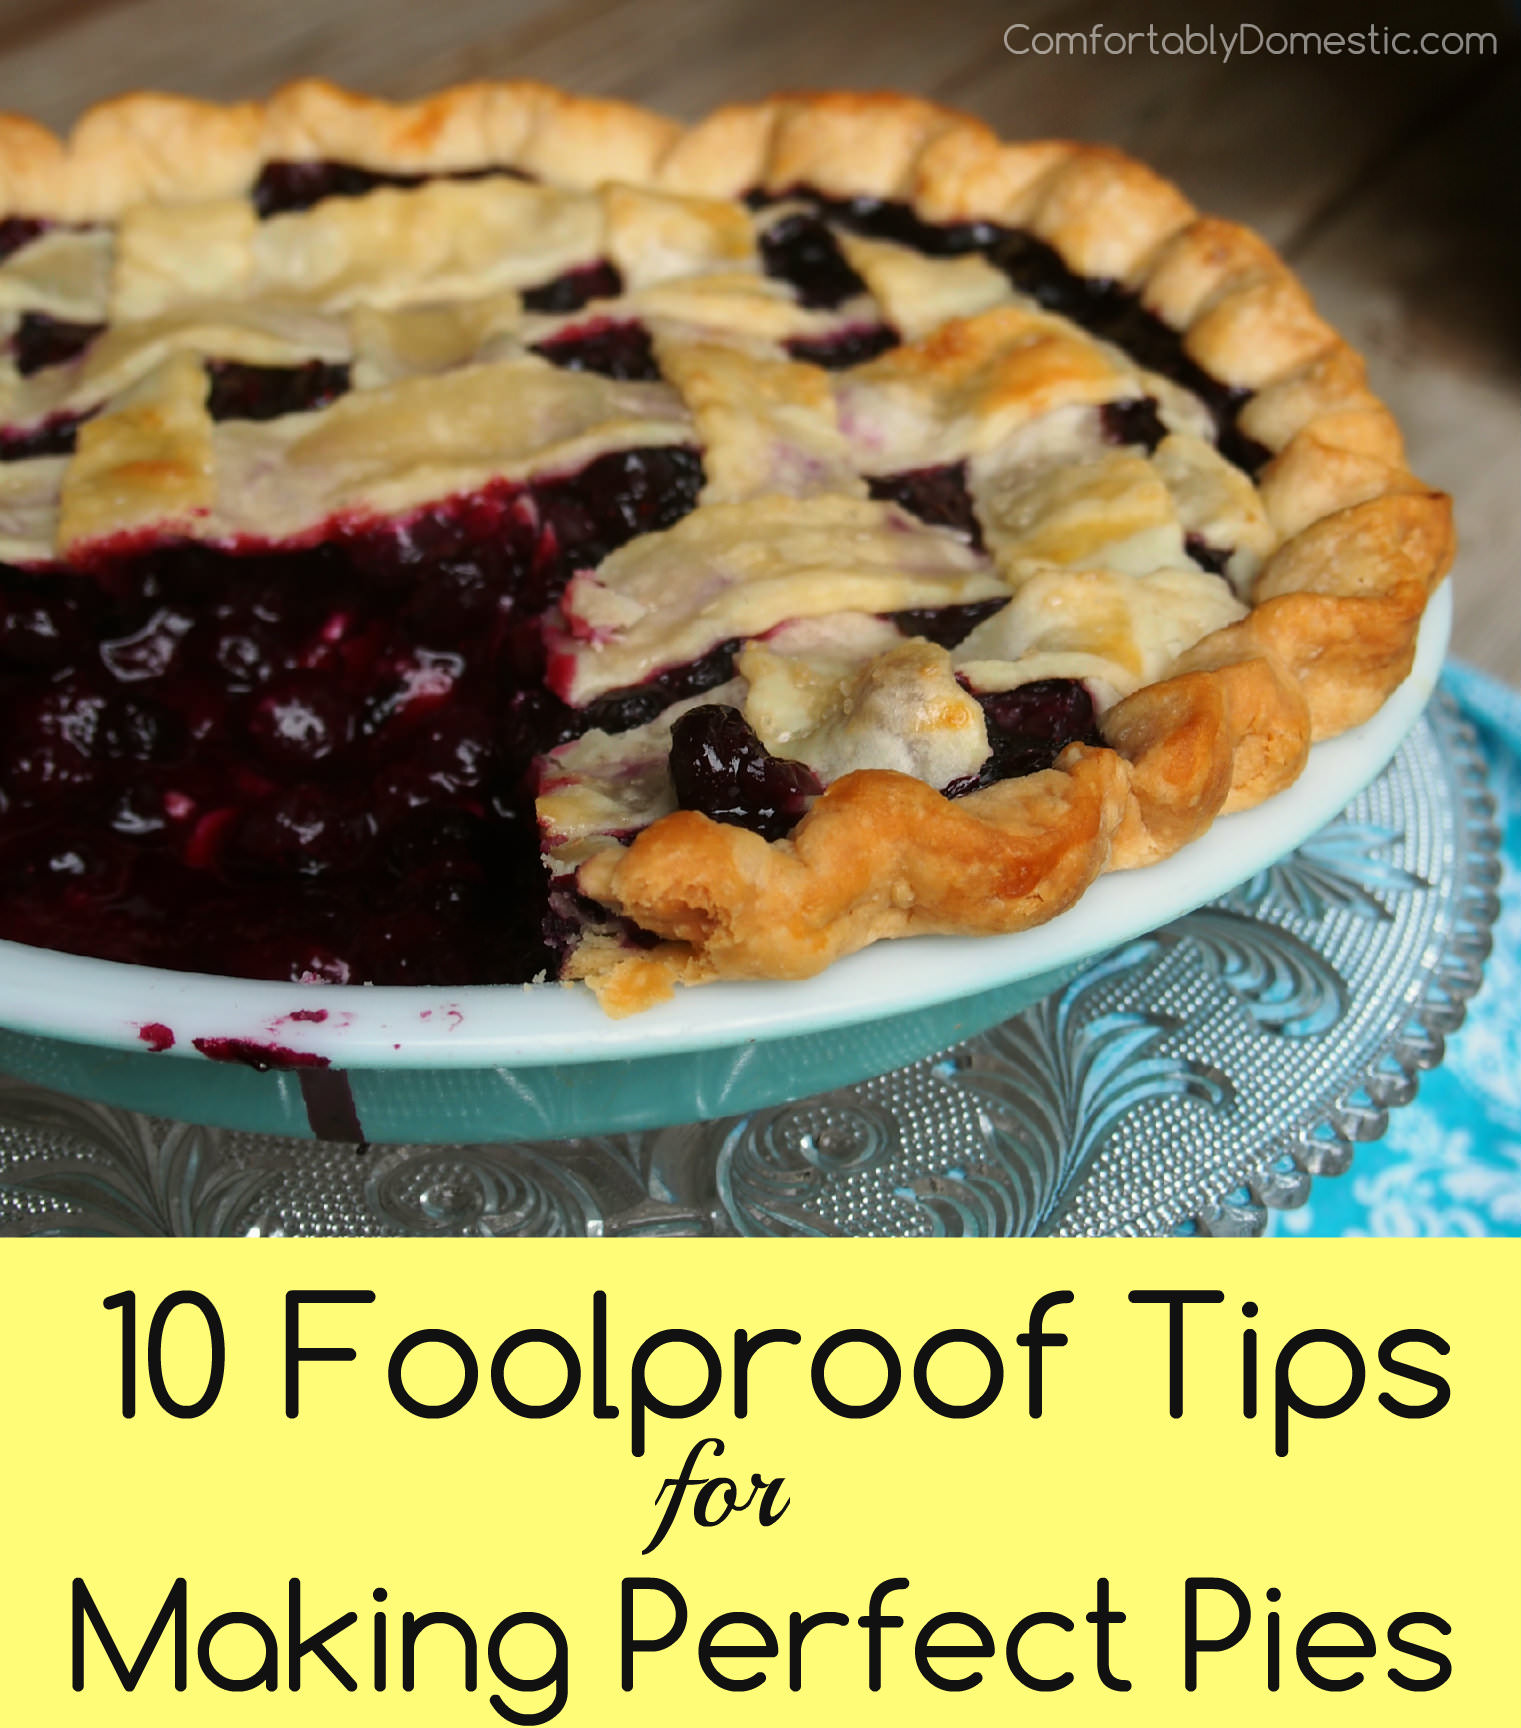 10 foolproof pie-making tips are here for your pie baking success, from a girl who's ruined her share of pies.  | ComfortablyDomestic.com